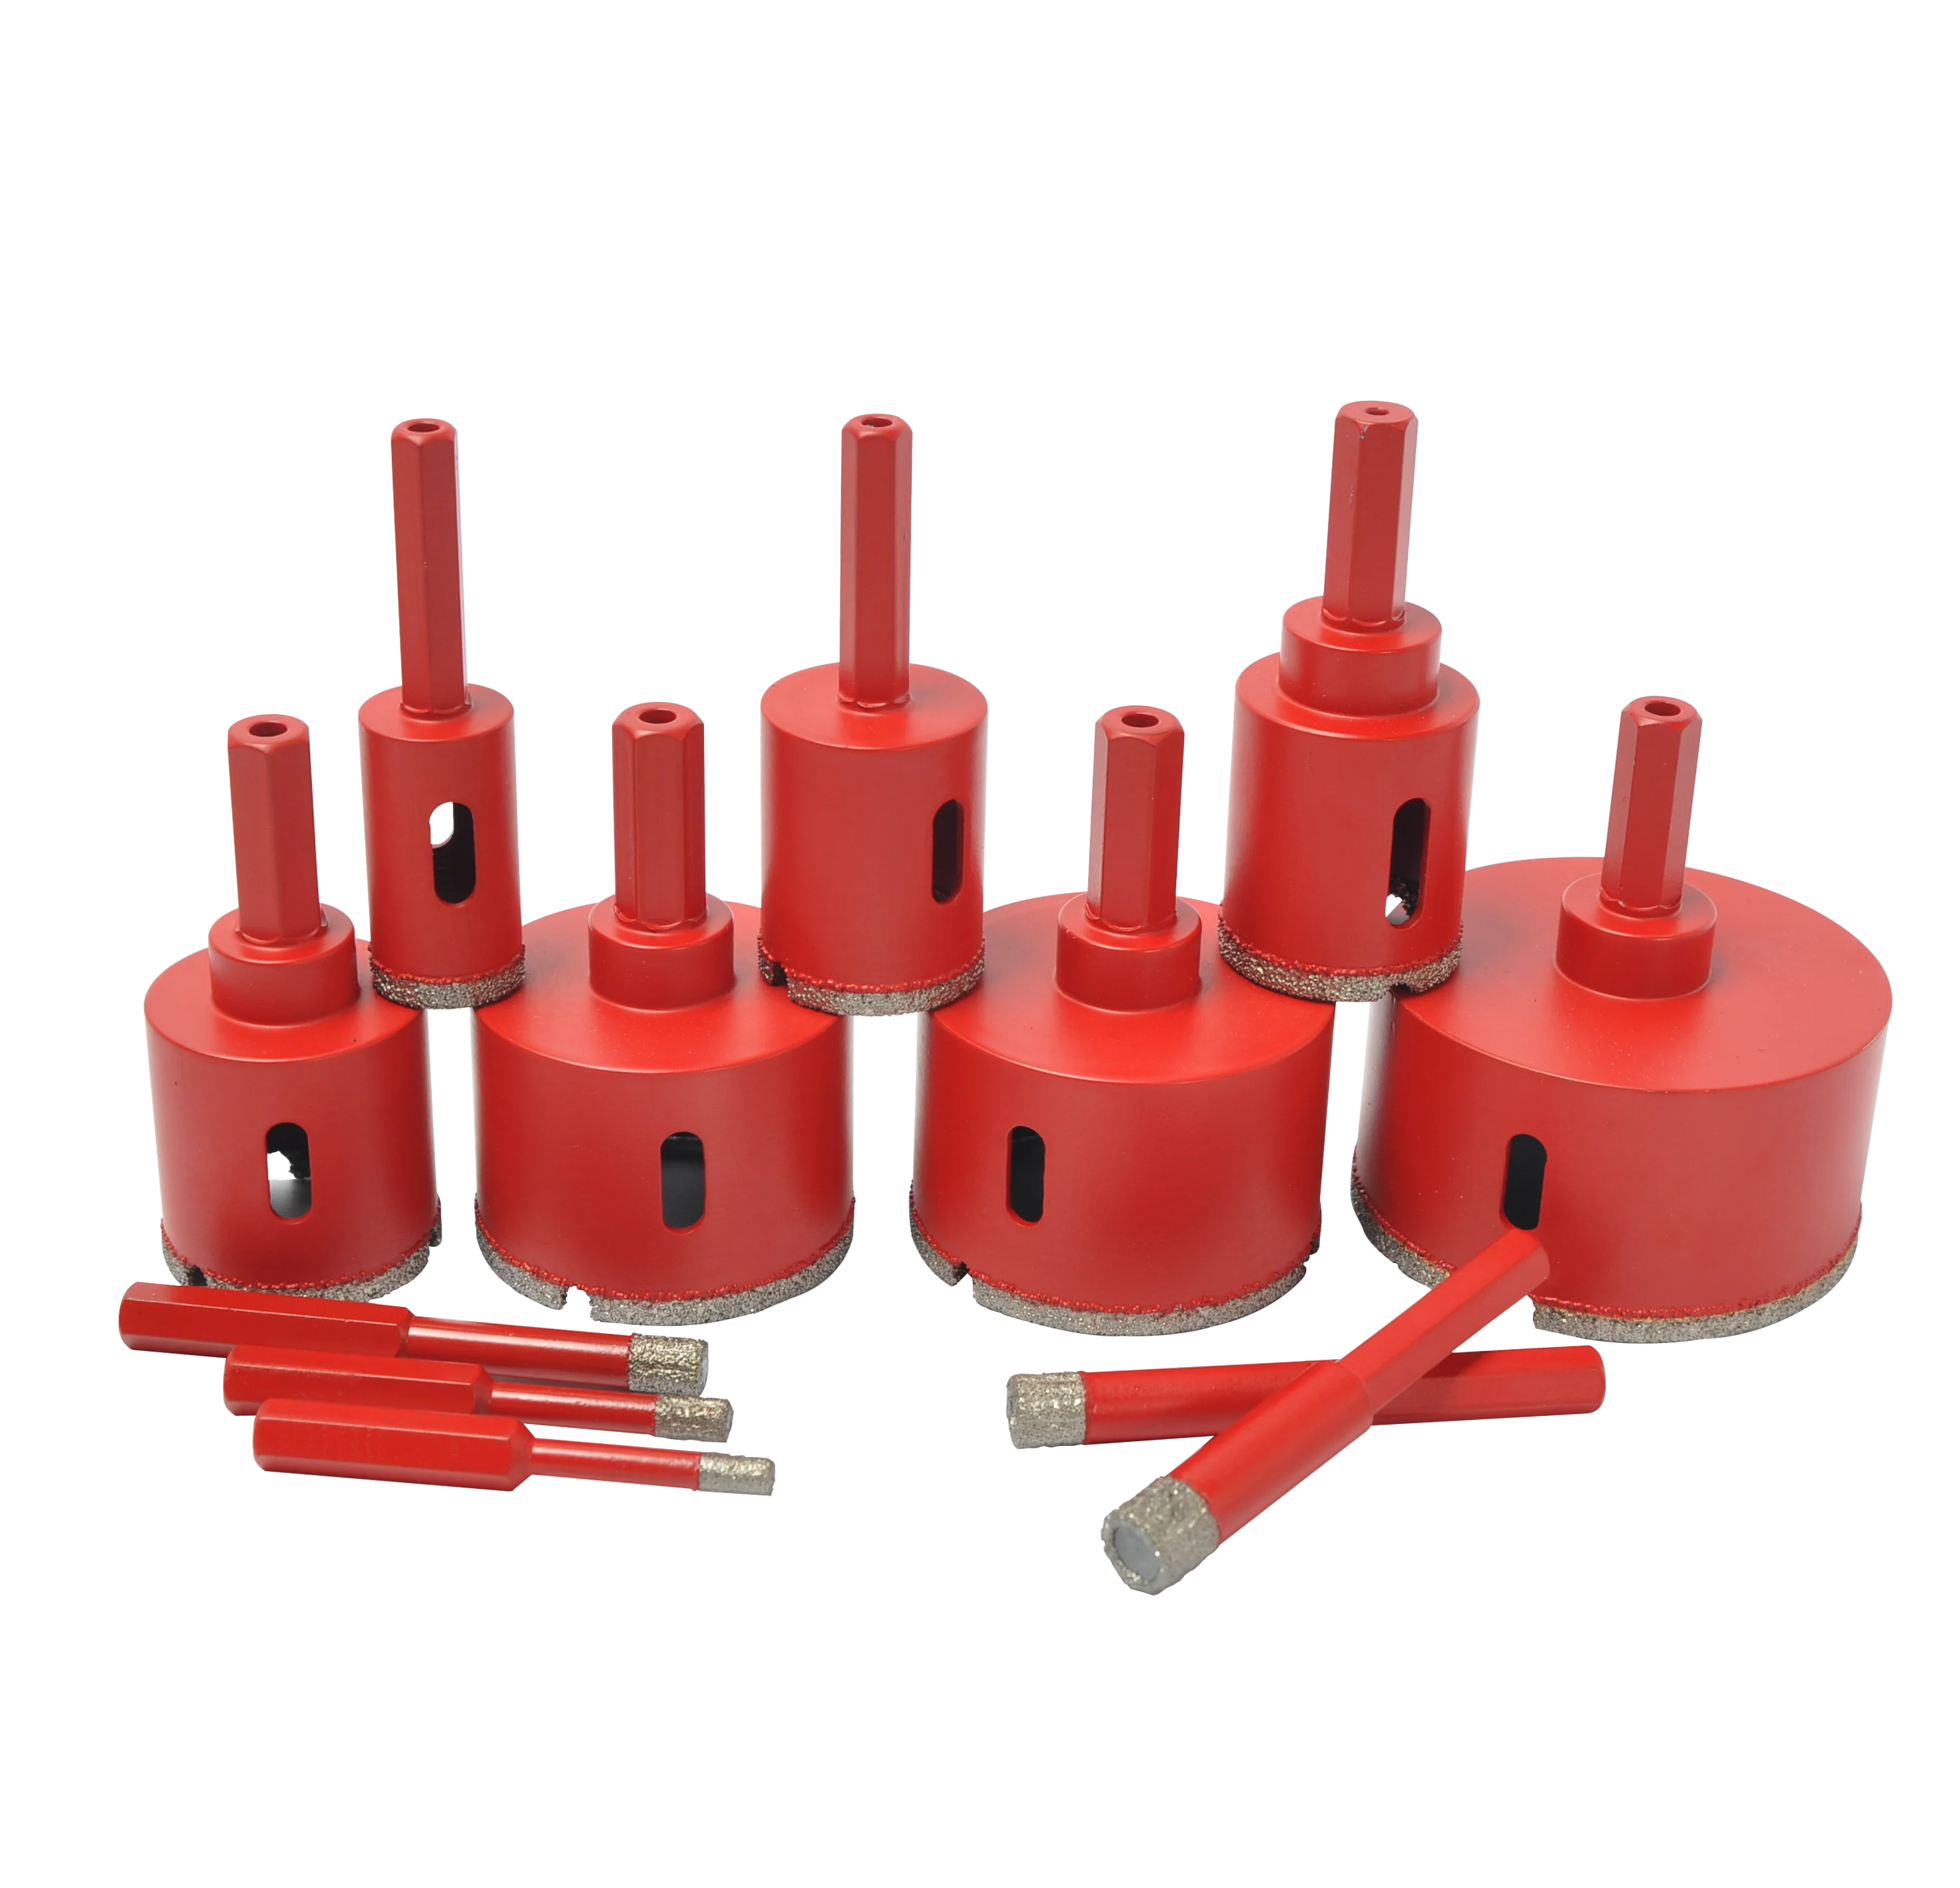 
Professional Diamond Dry Drill Bit Set for Angle Grinder 